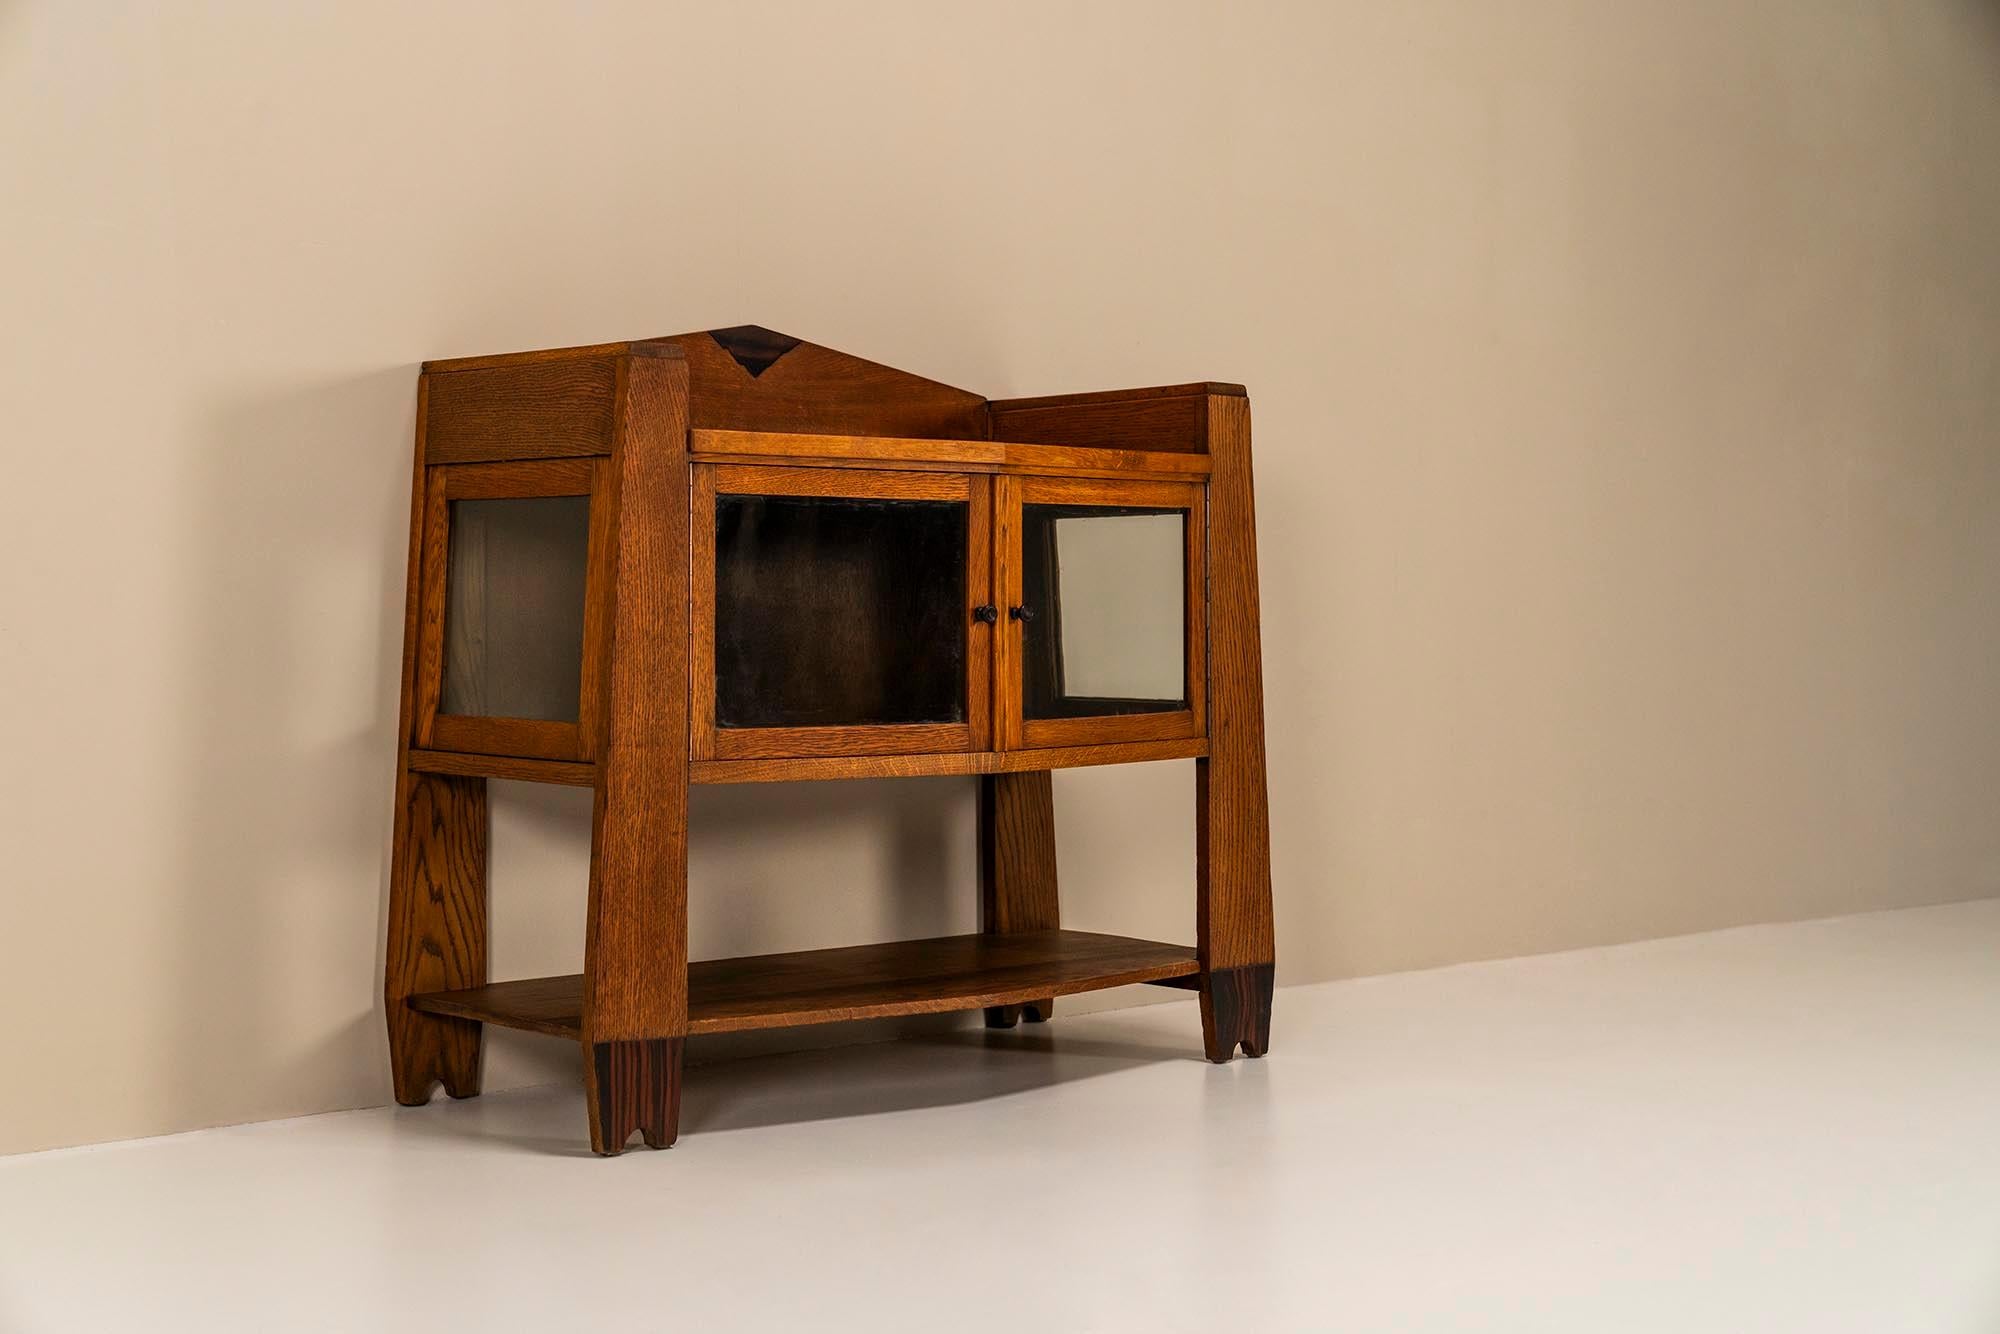 Amsterdamse School Cabinet In Oak And Macassar, Netherlands 1930s For Sale 1